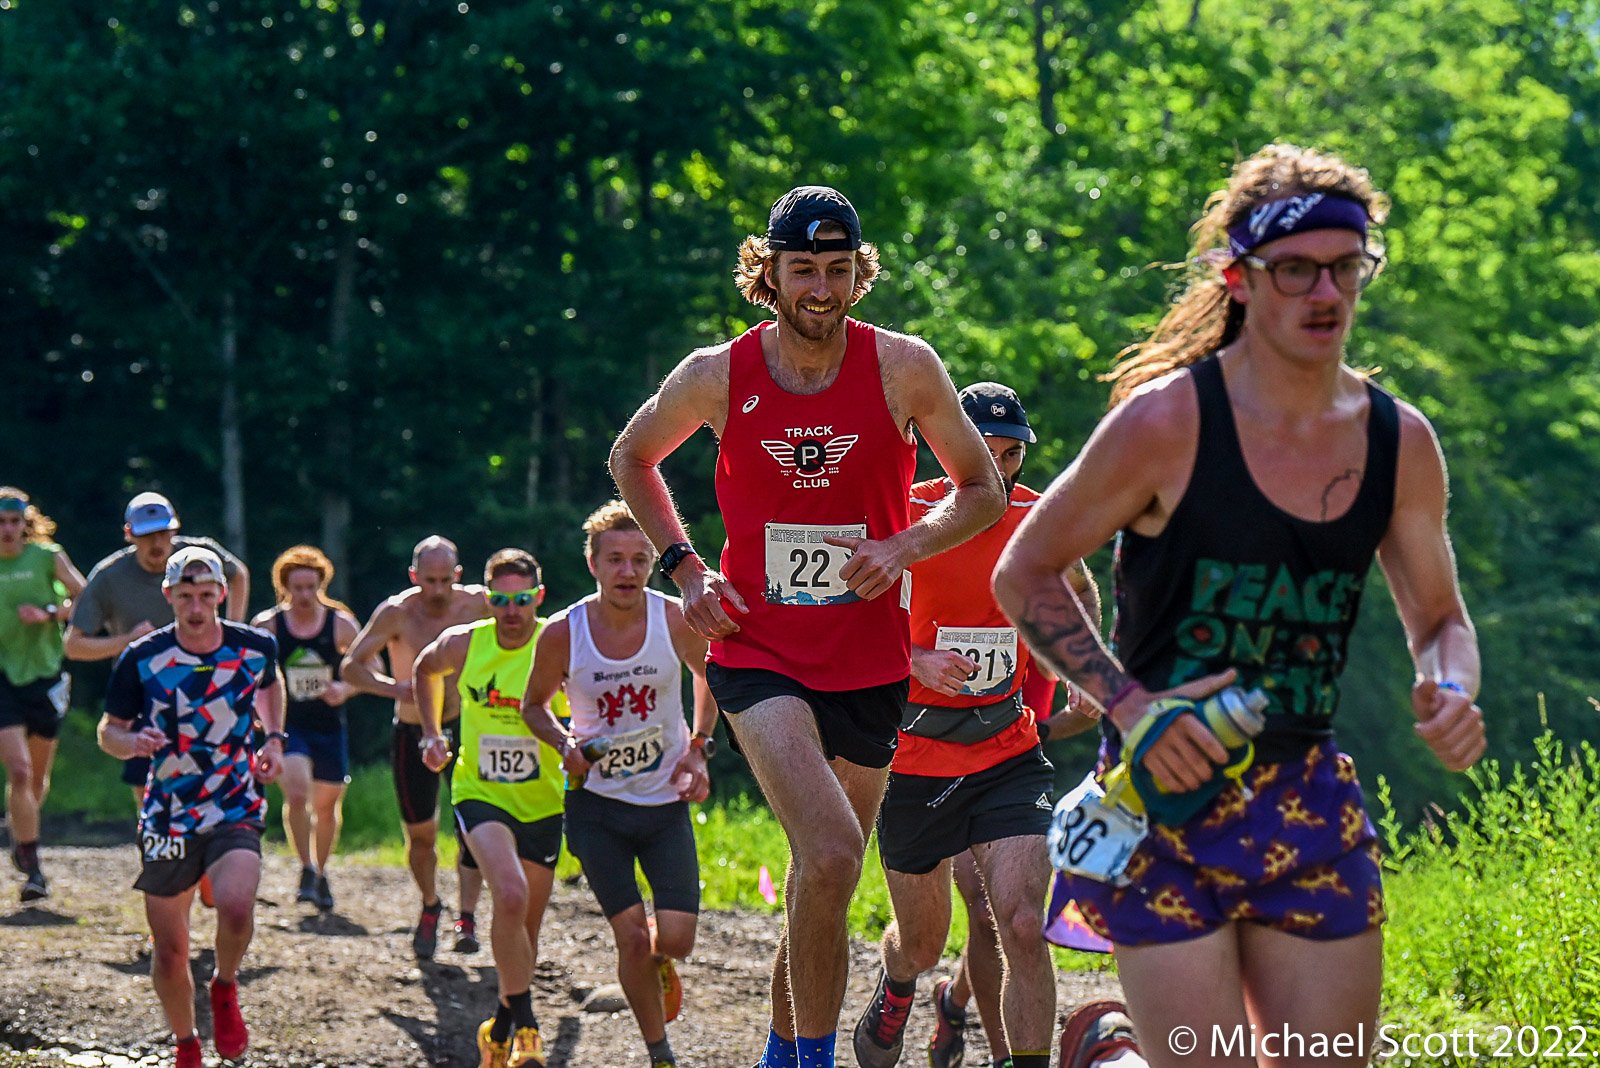 USATF Mountain Running Championships at Whiteface Mountain, NY on July 2nd